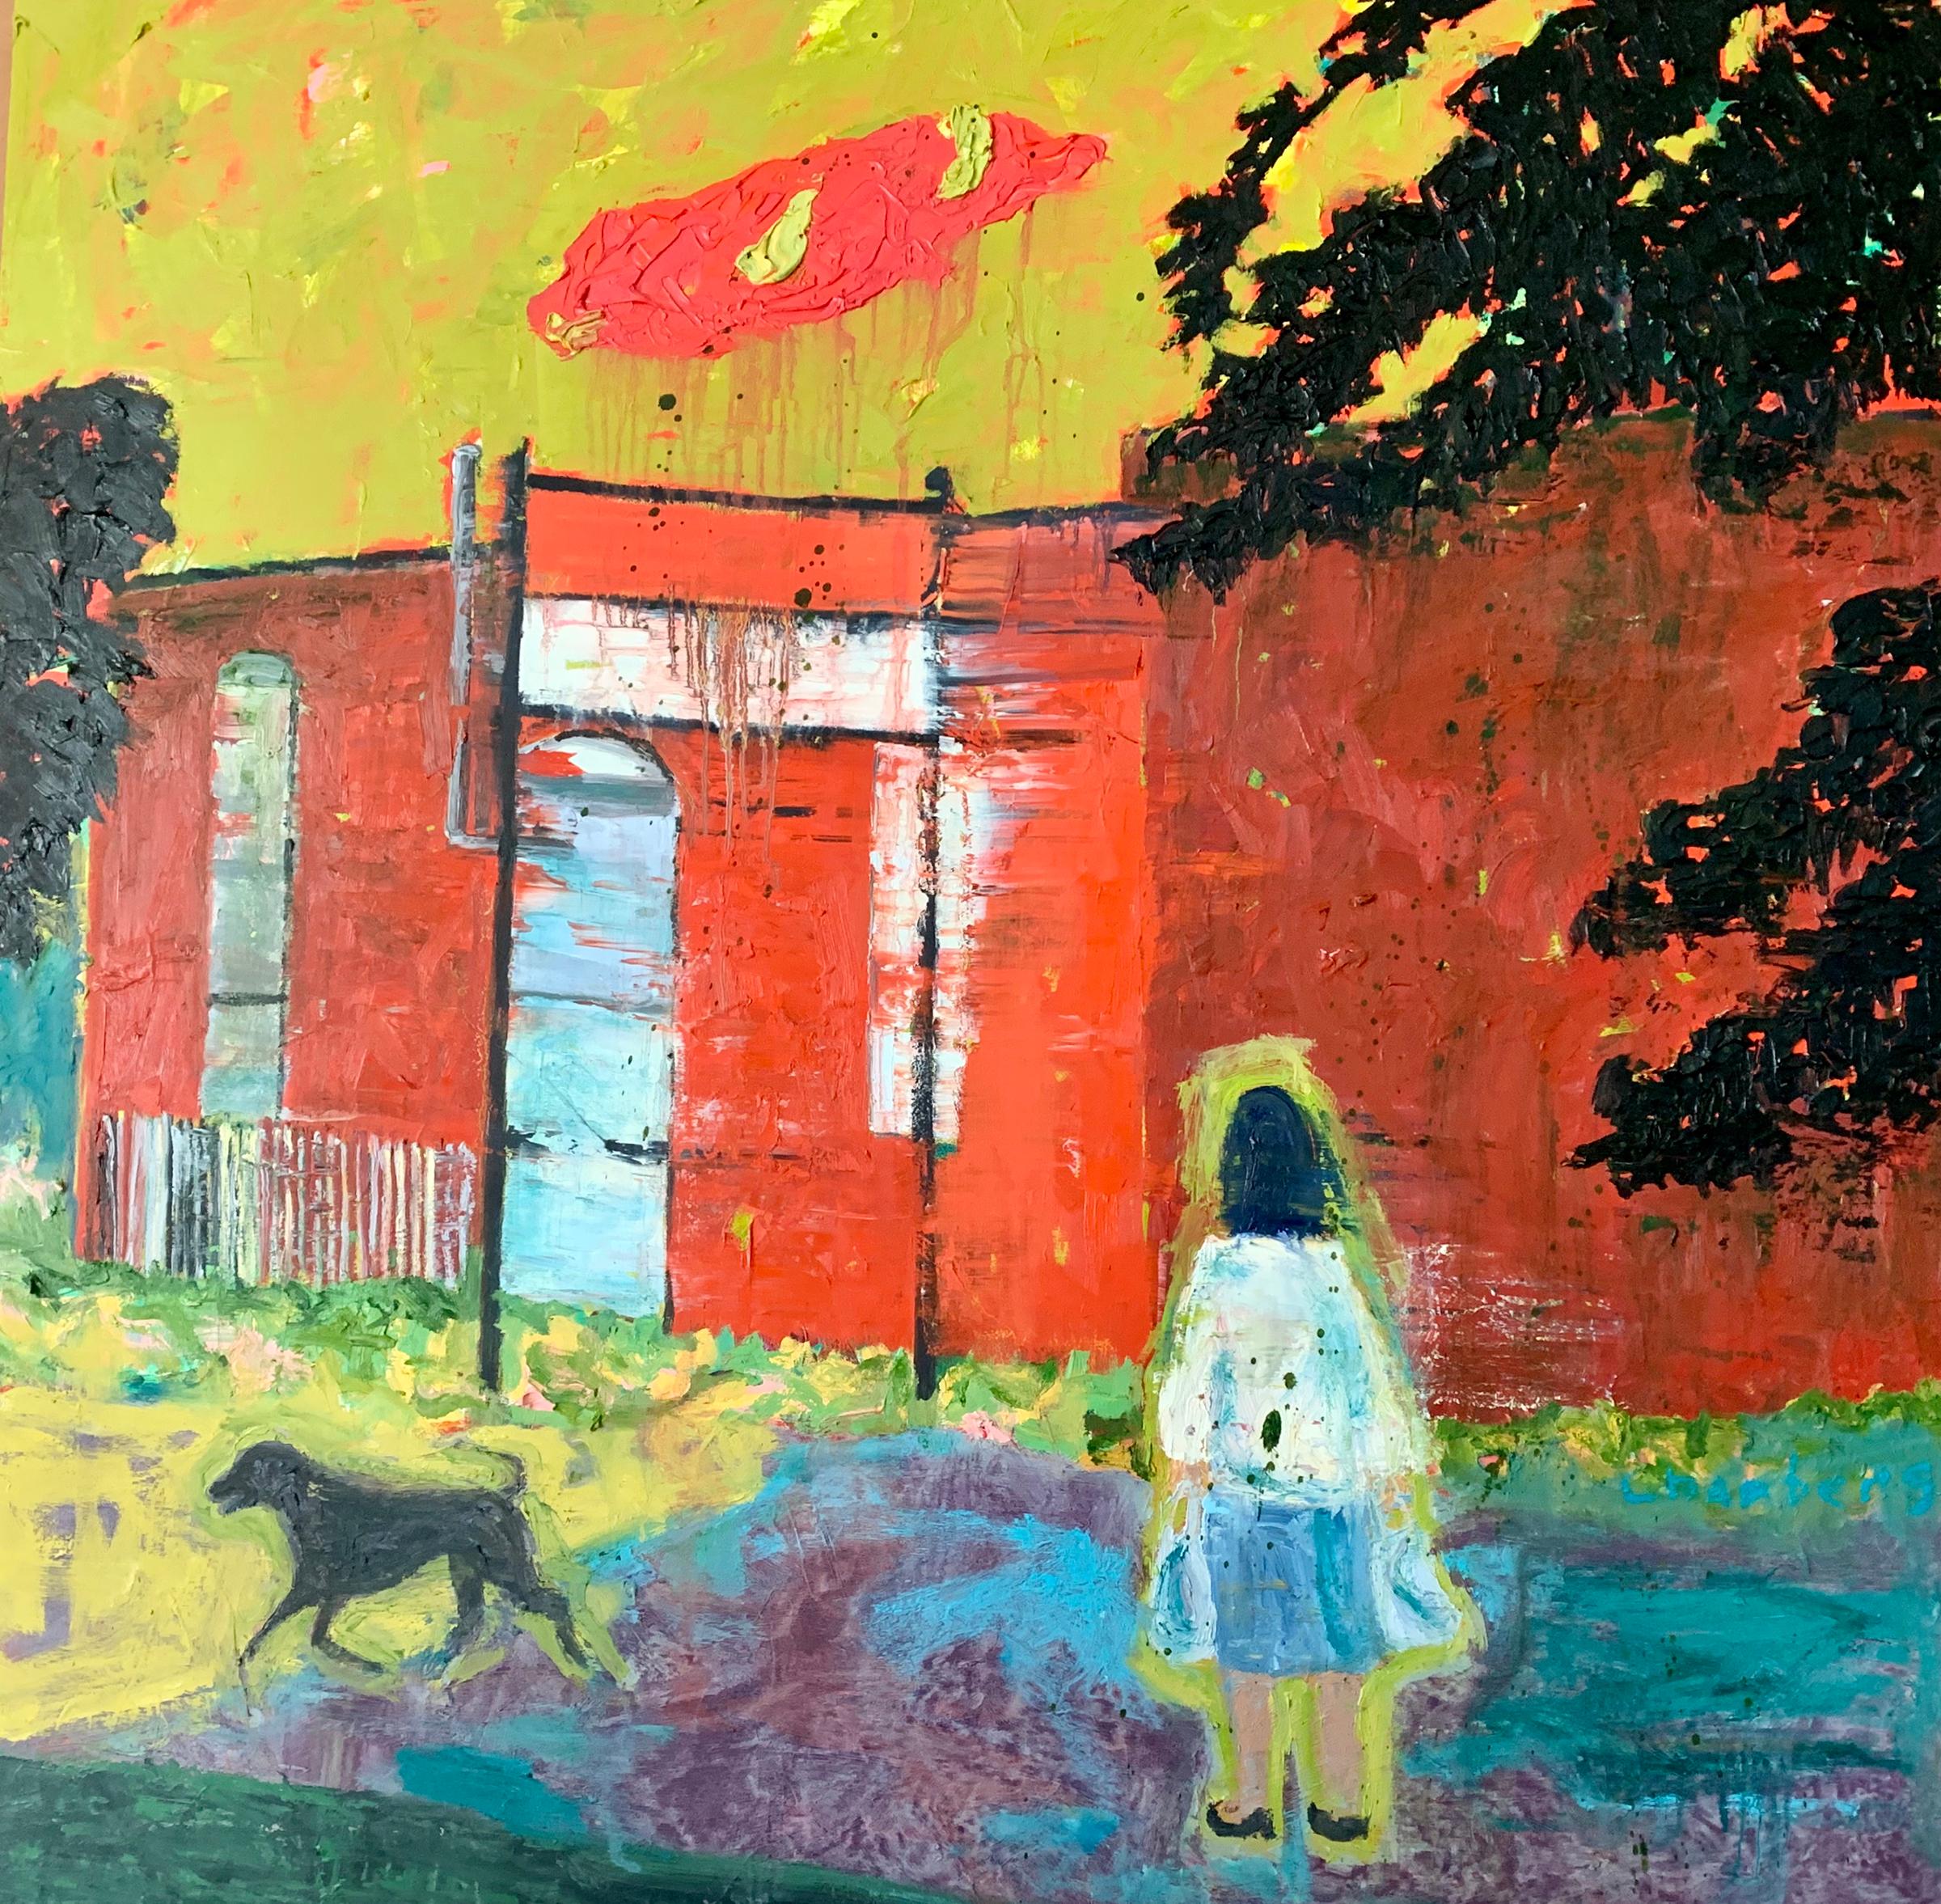 Bold, evocative, and eerie, "Home From Shopping" combines a variety of strong colors with visceral application that serve to emphasize this turbulent composition. 

Chambers transforms the pastoral into the extraordinary. Long before she puts paint